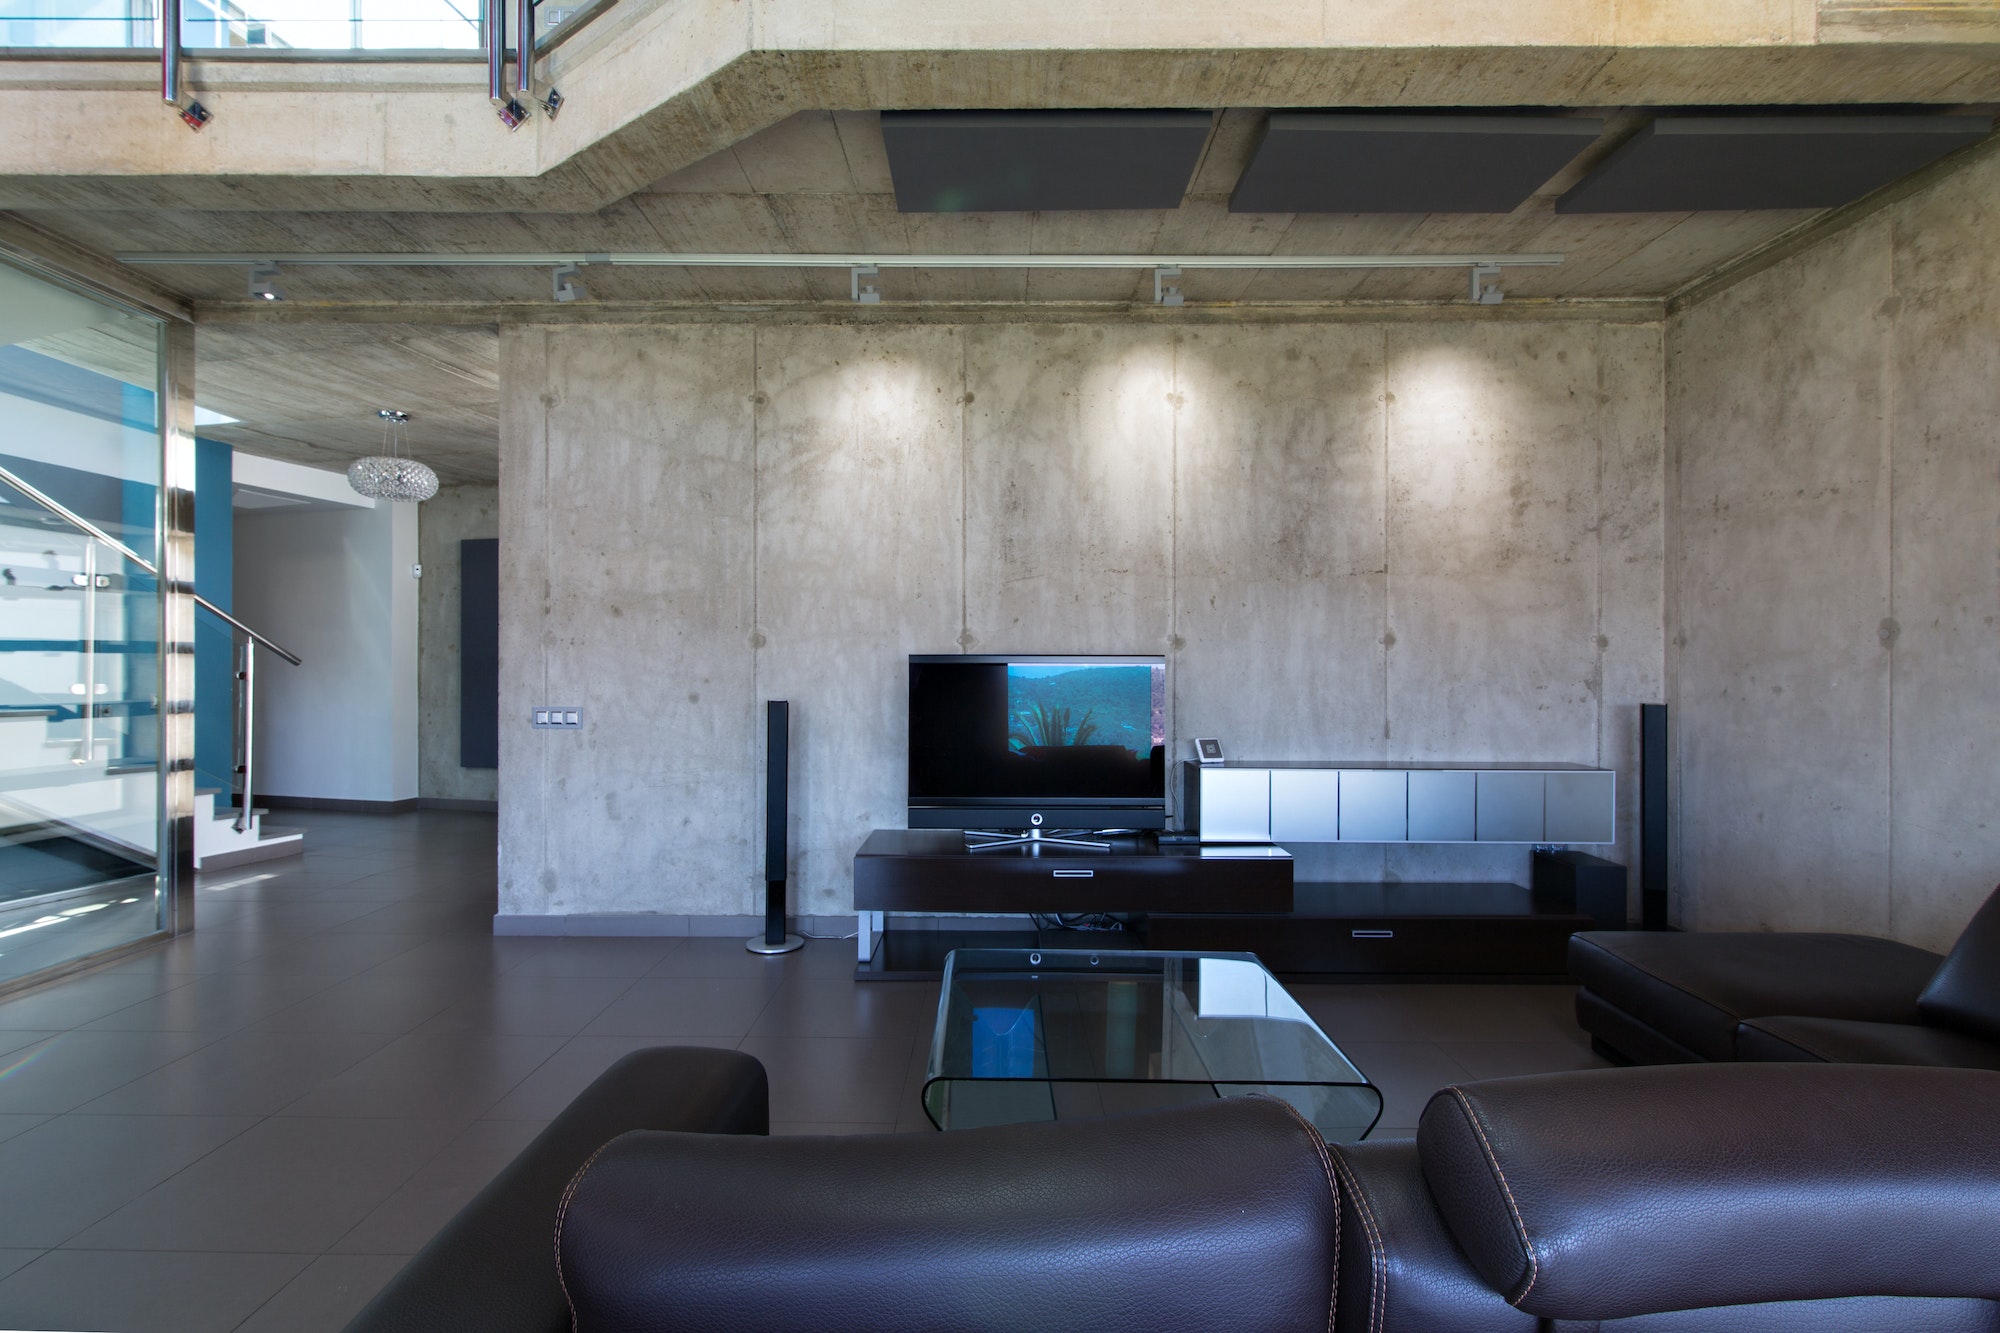 Living room in interior of modern concrete house.